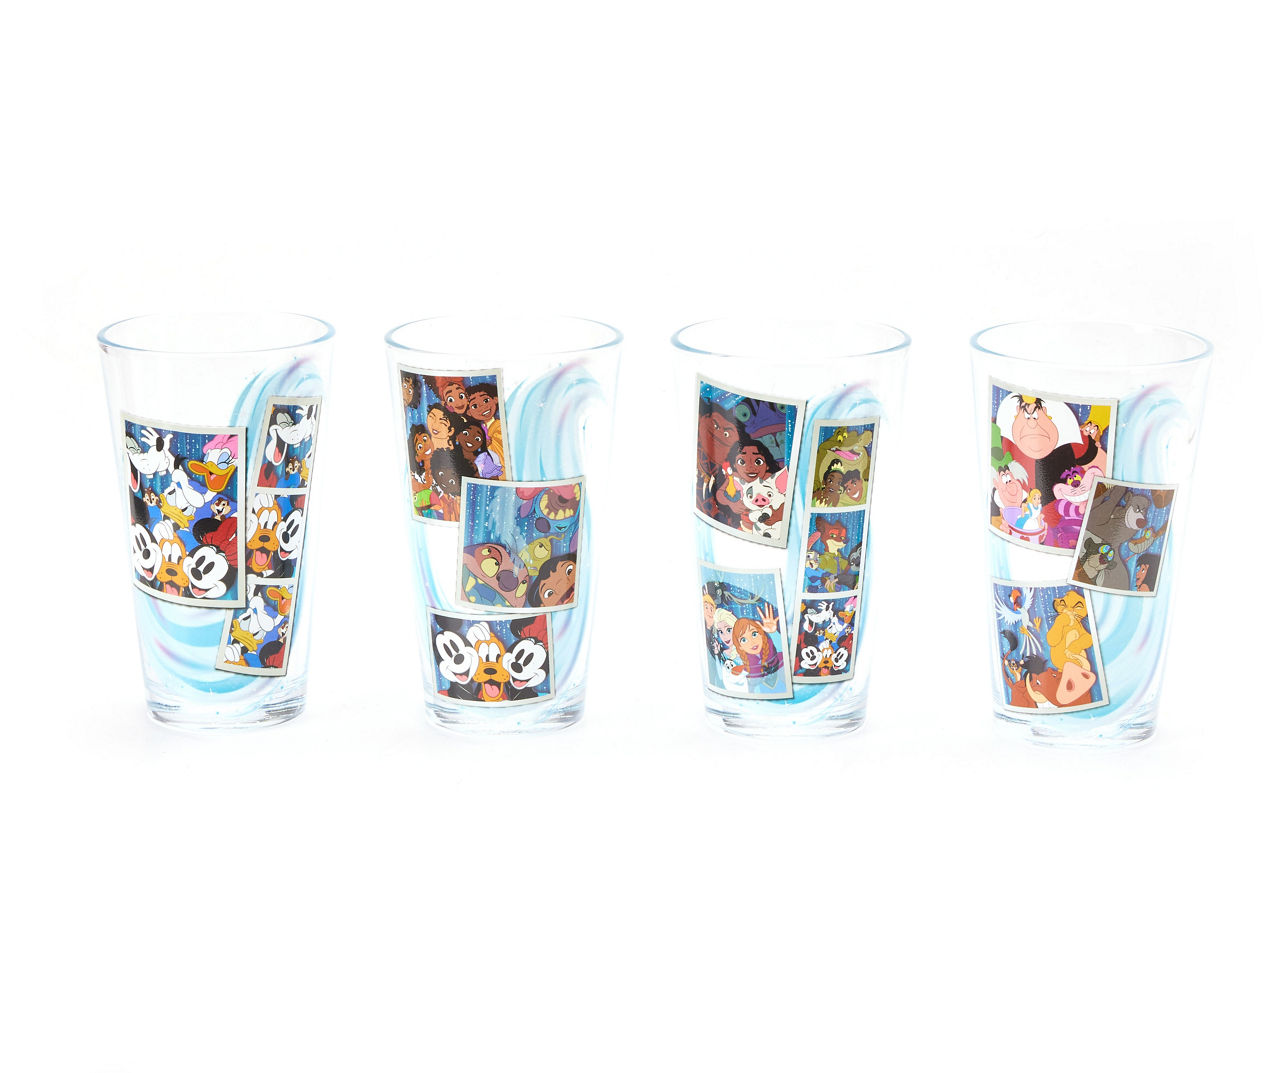 Disney Disney 100 Character Collage Pint Glass Set, 4-Pack